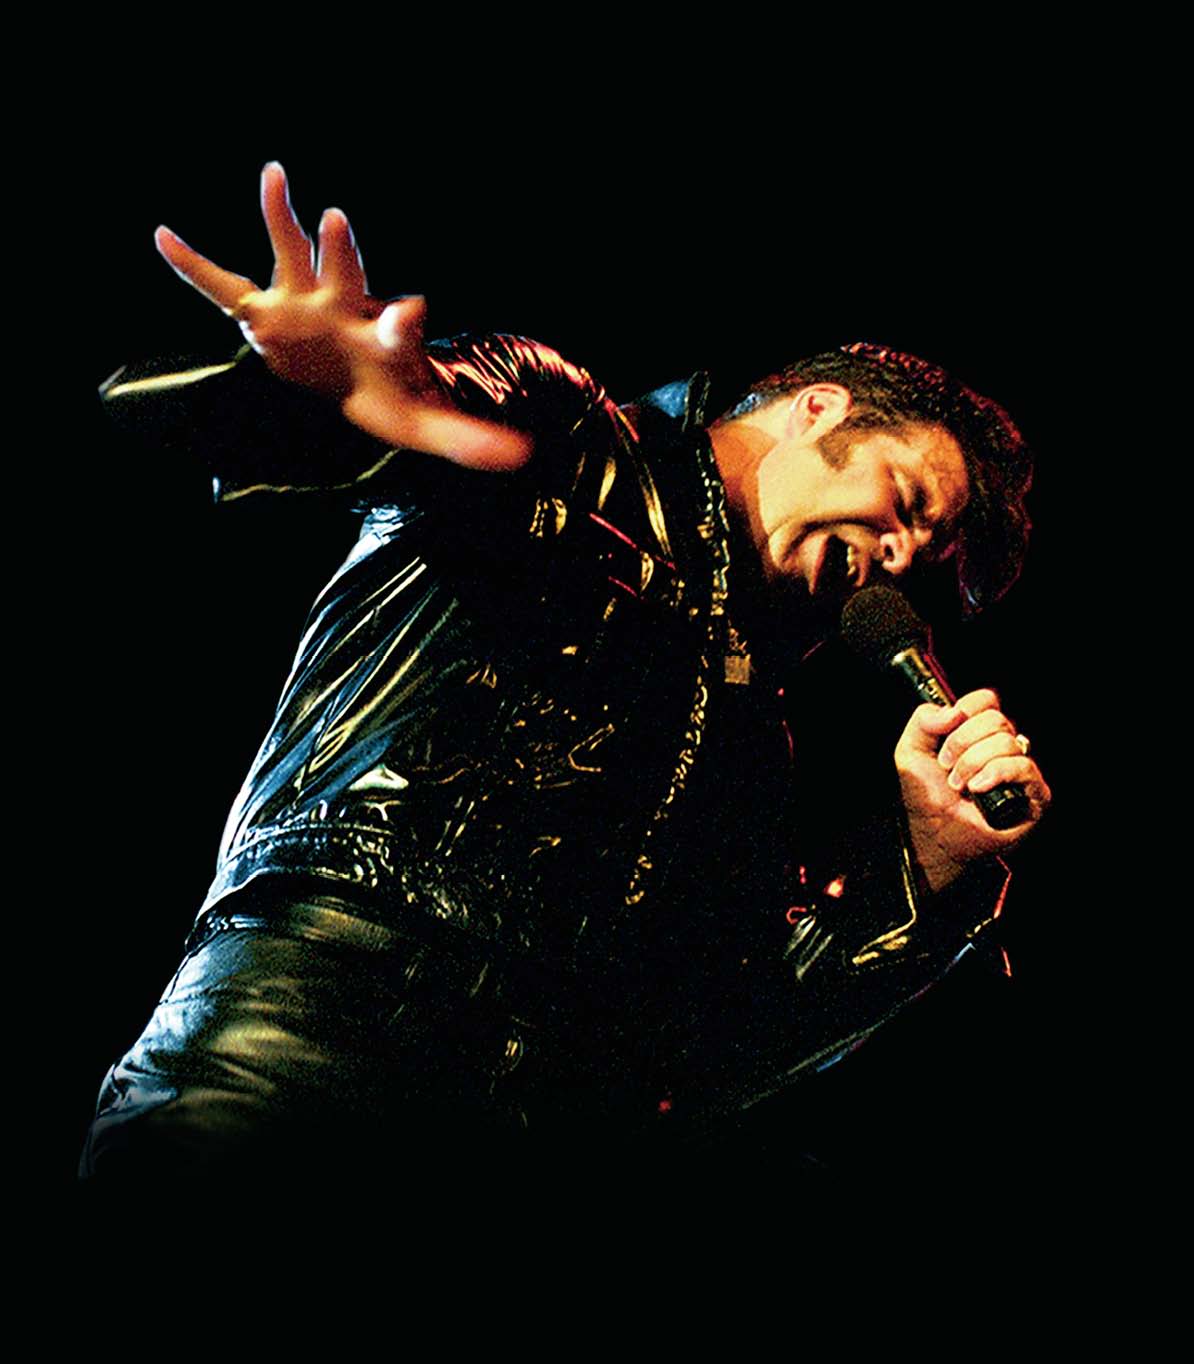 image of "Tribute to the King" Elvis impersonator clad in all black leather and singing